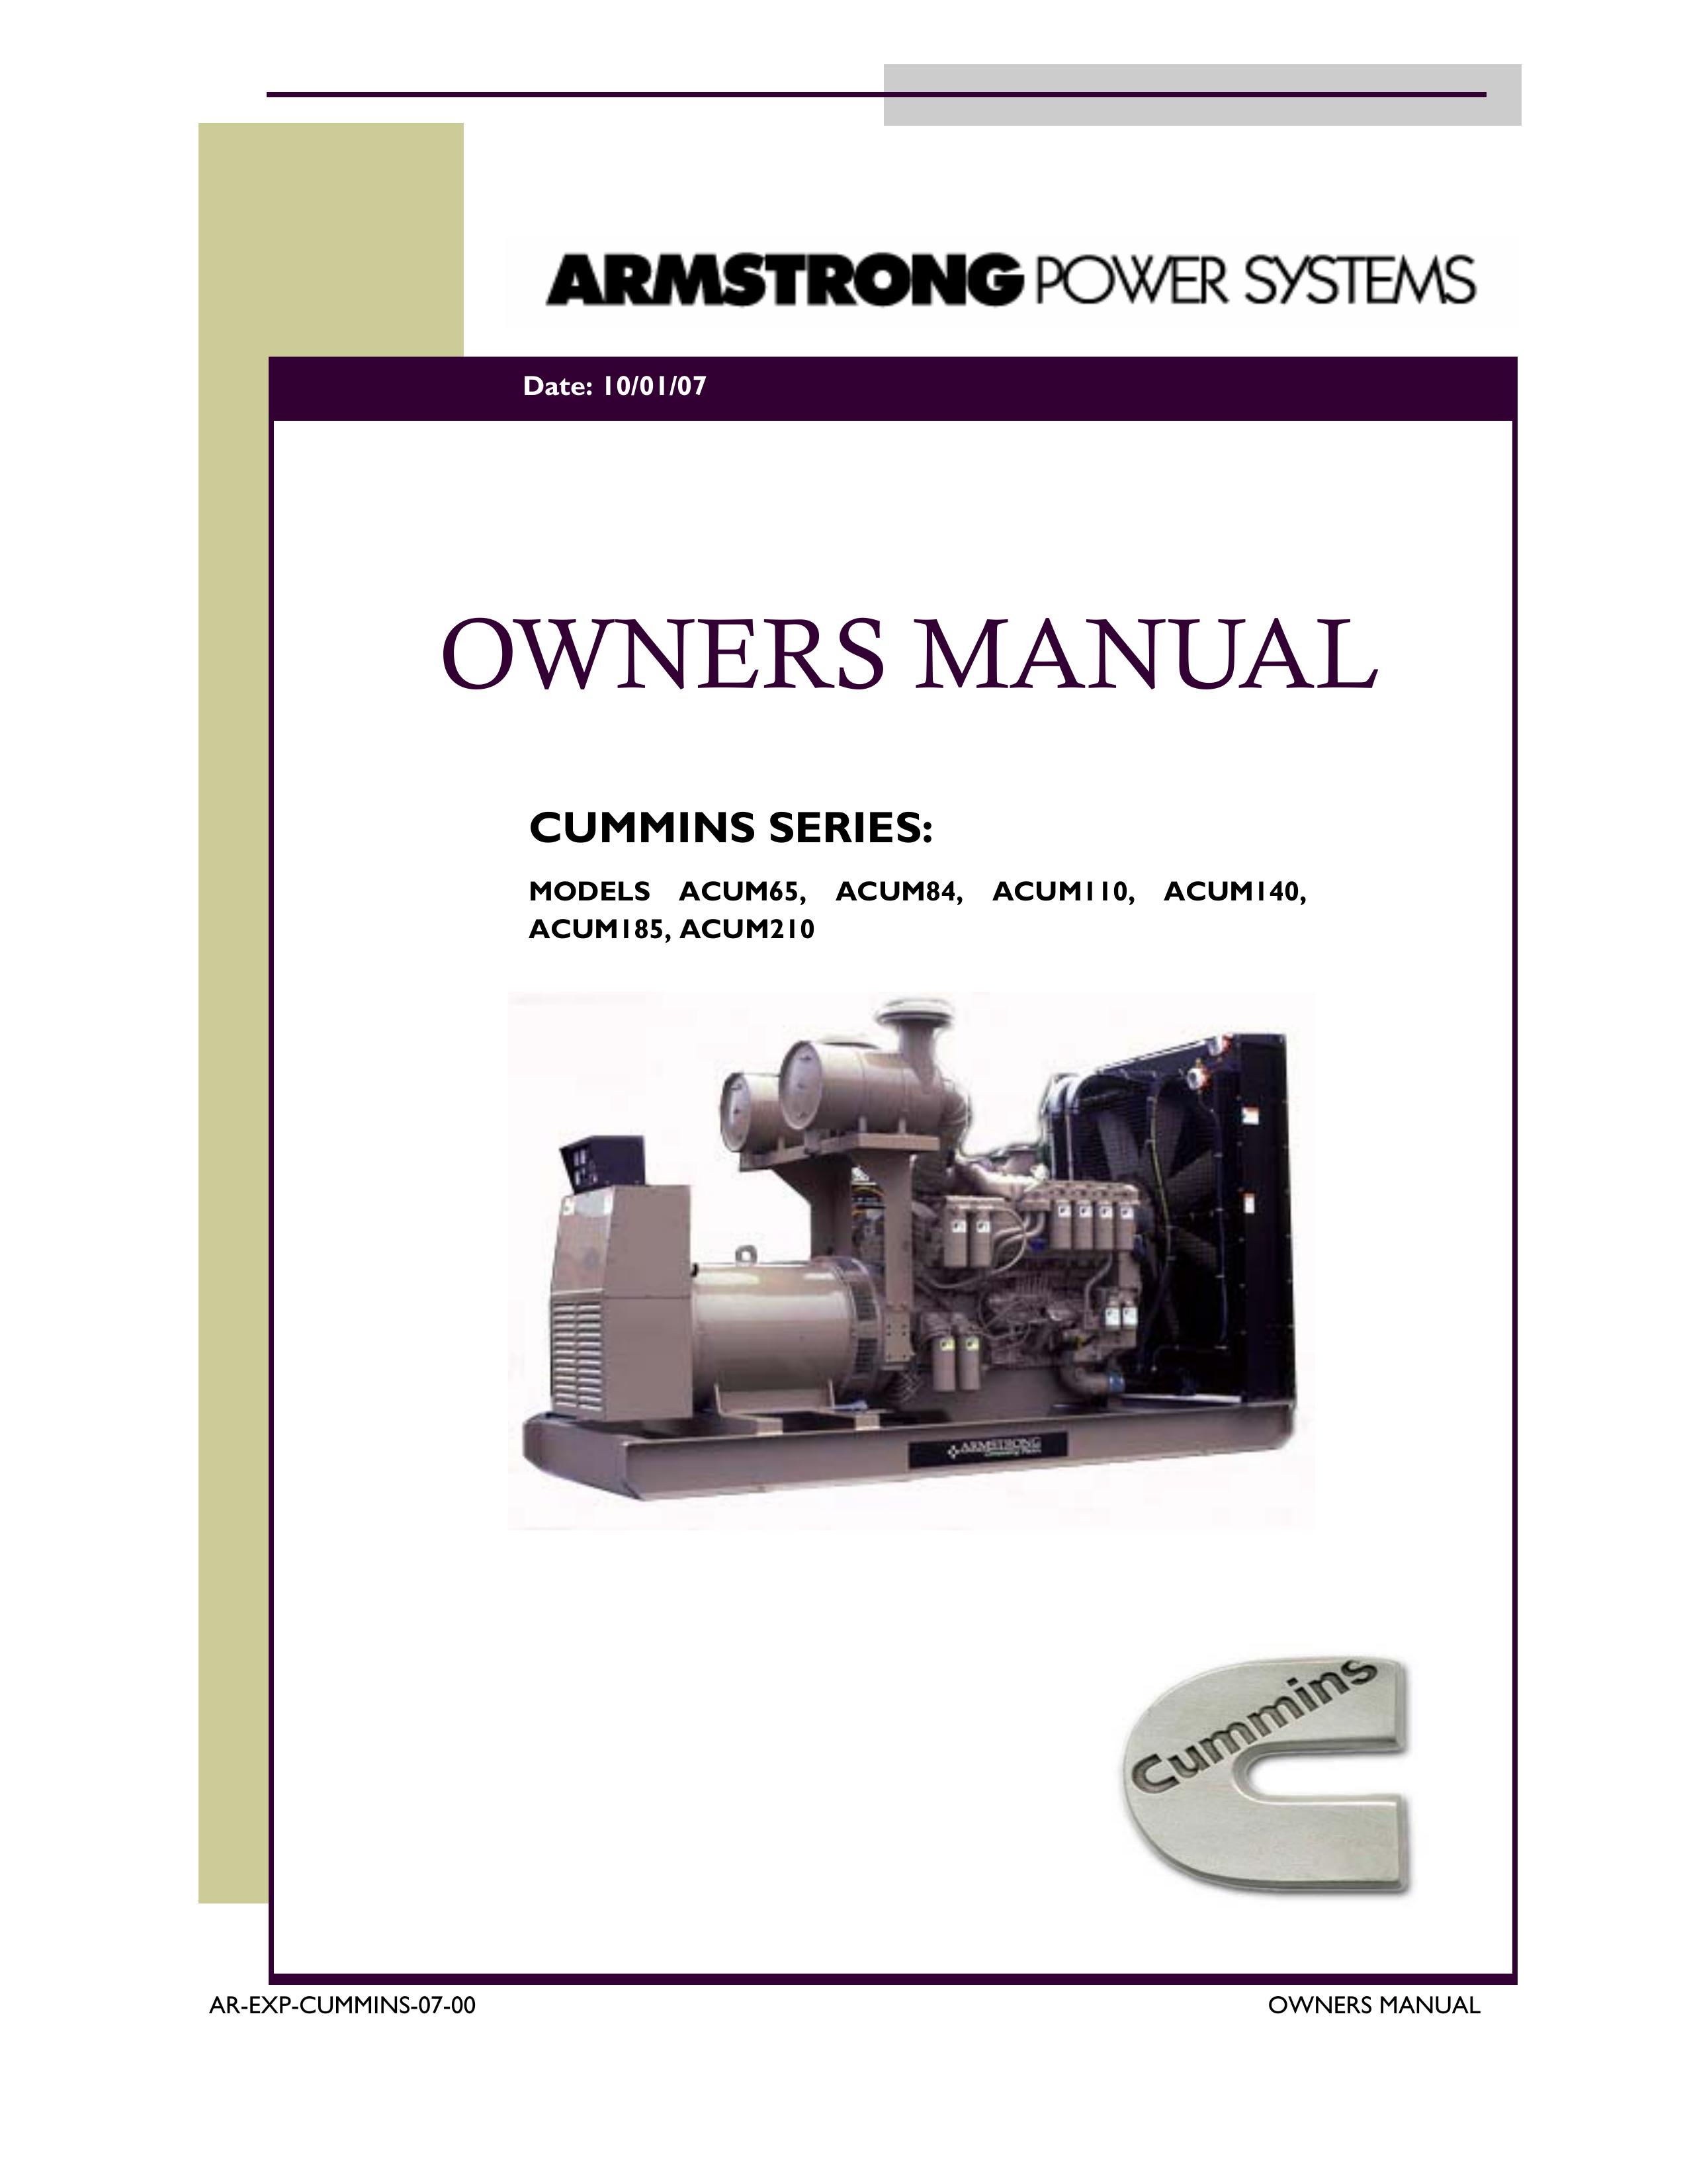 Armstrong World Industries ACUM110 Portable Generator User Manual